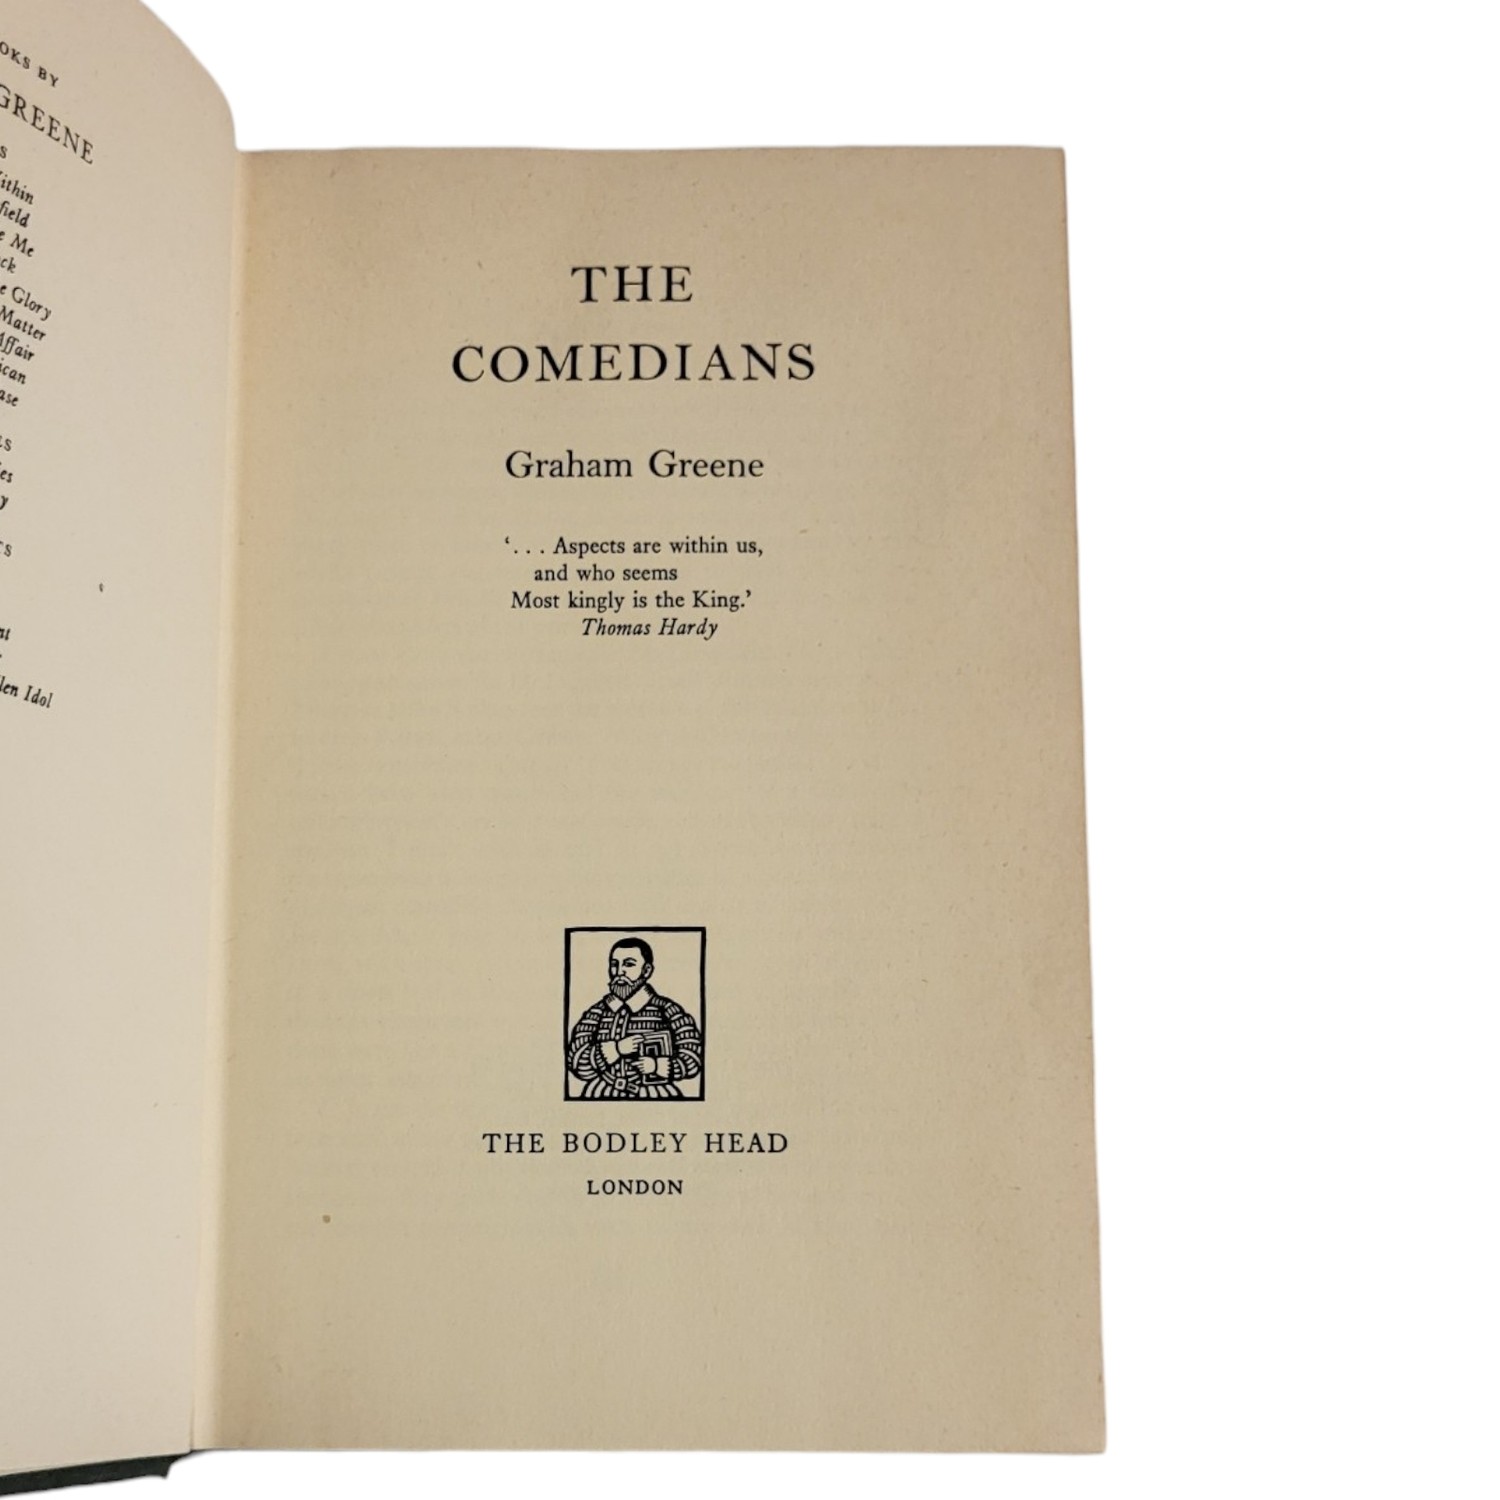 GRAHAM GREENE, THE COMEDIANS, DUST JACKET BY IVAN LAPPER First published for The Bodley Head Ltd, by - Image 5 of 9